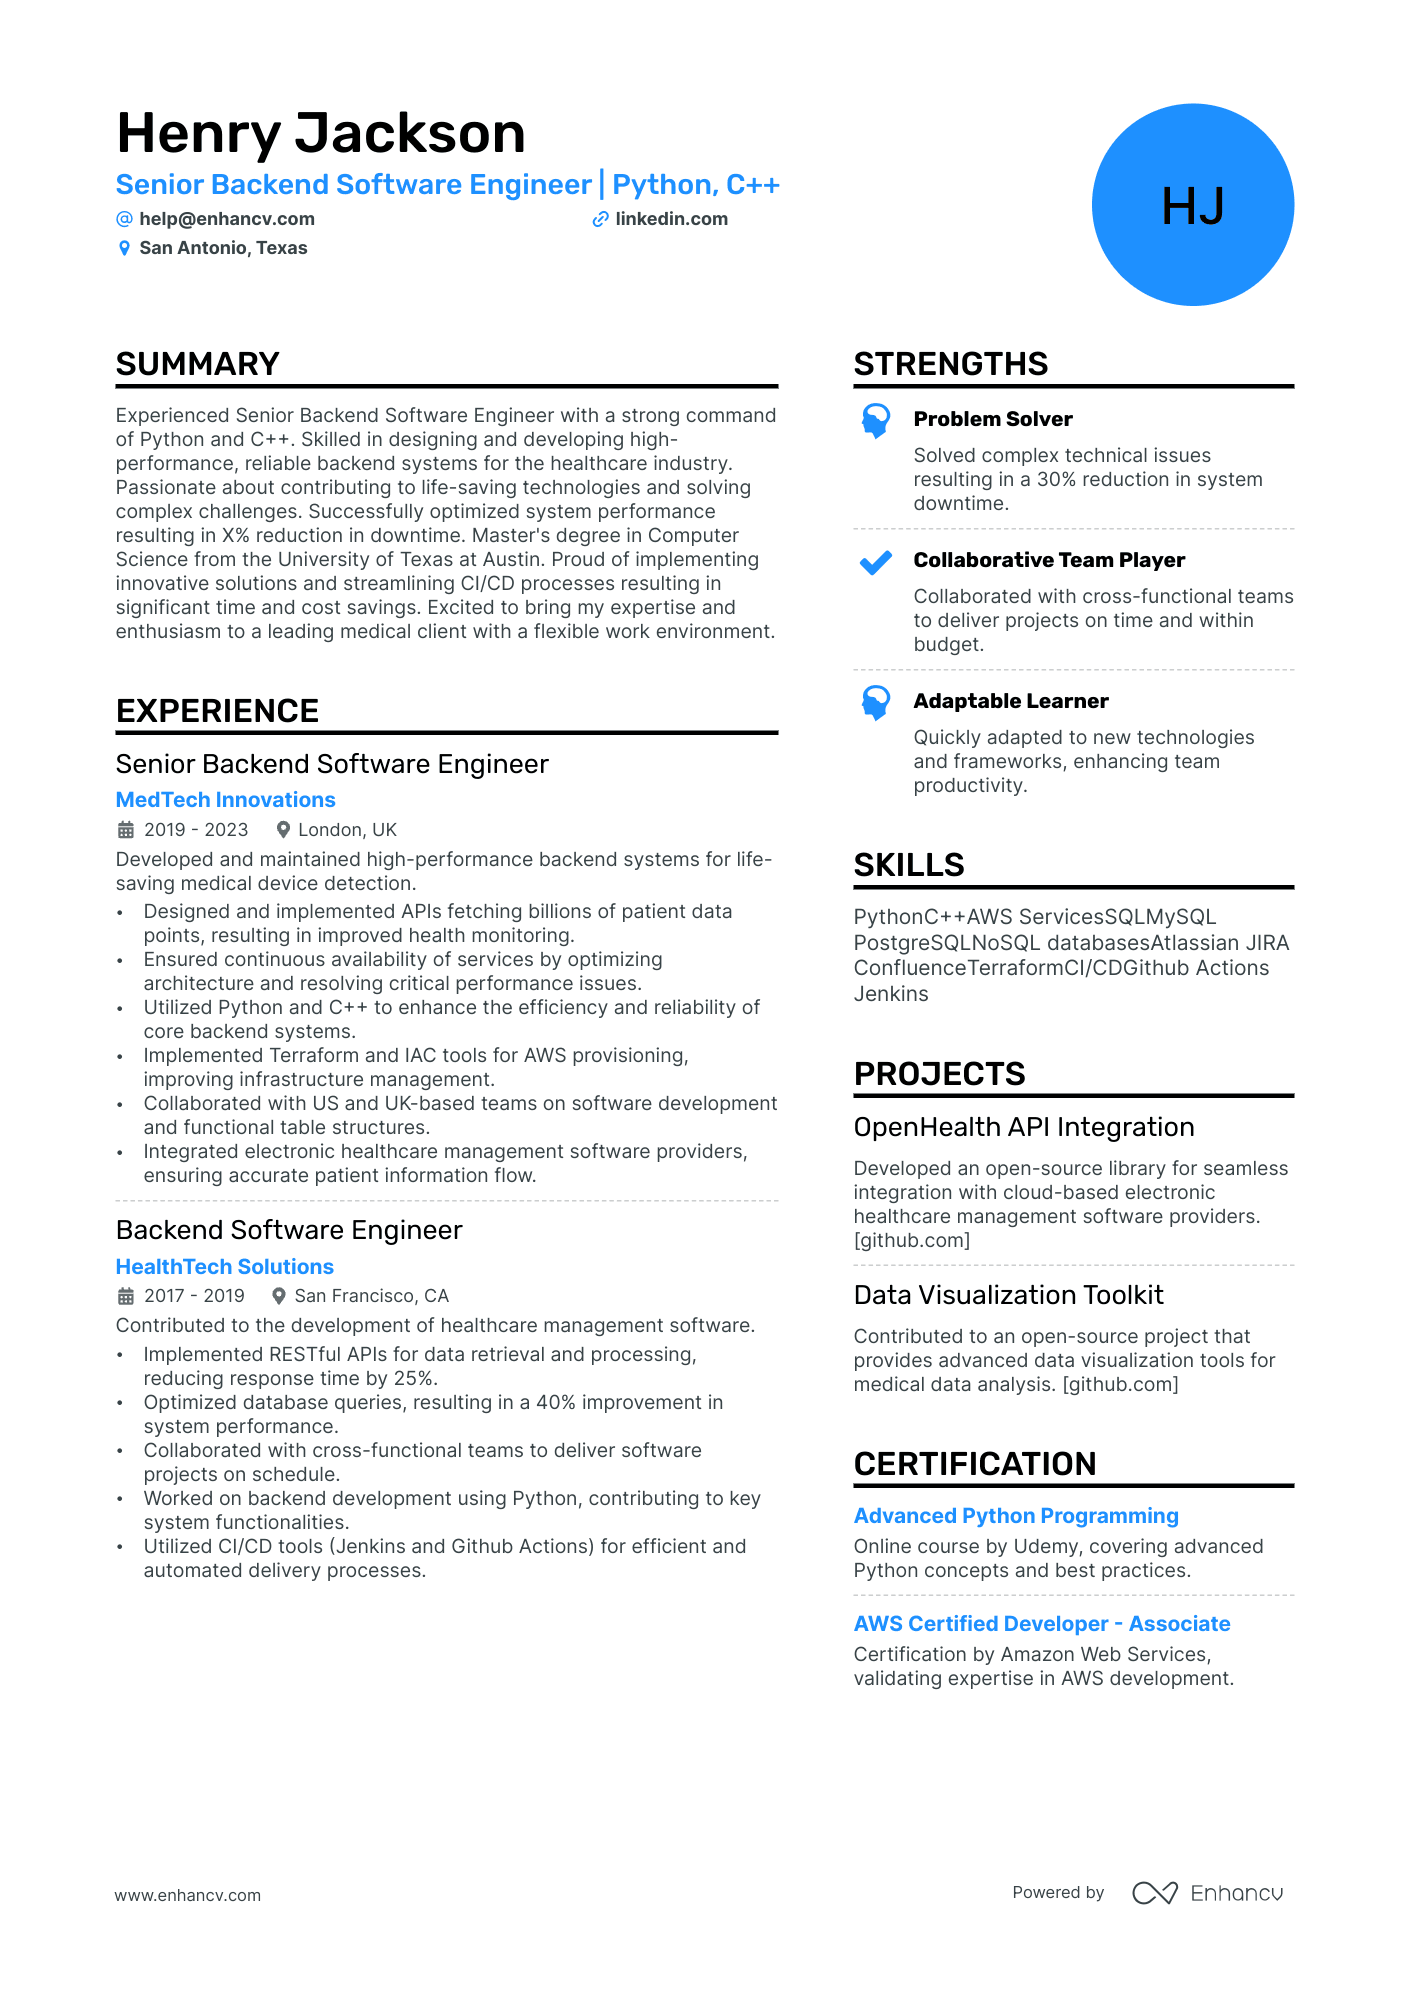 resume format for mechanical engineer with 10 year experience